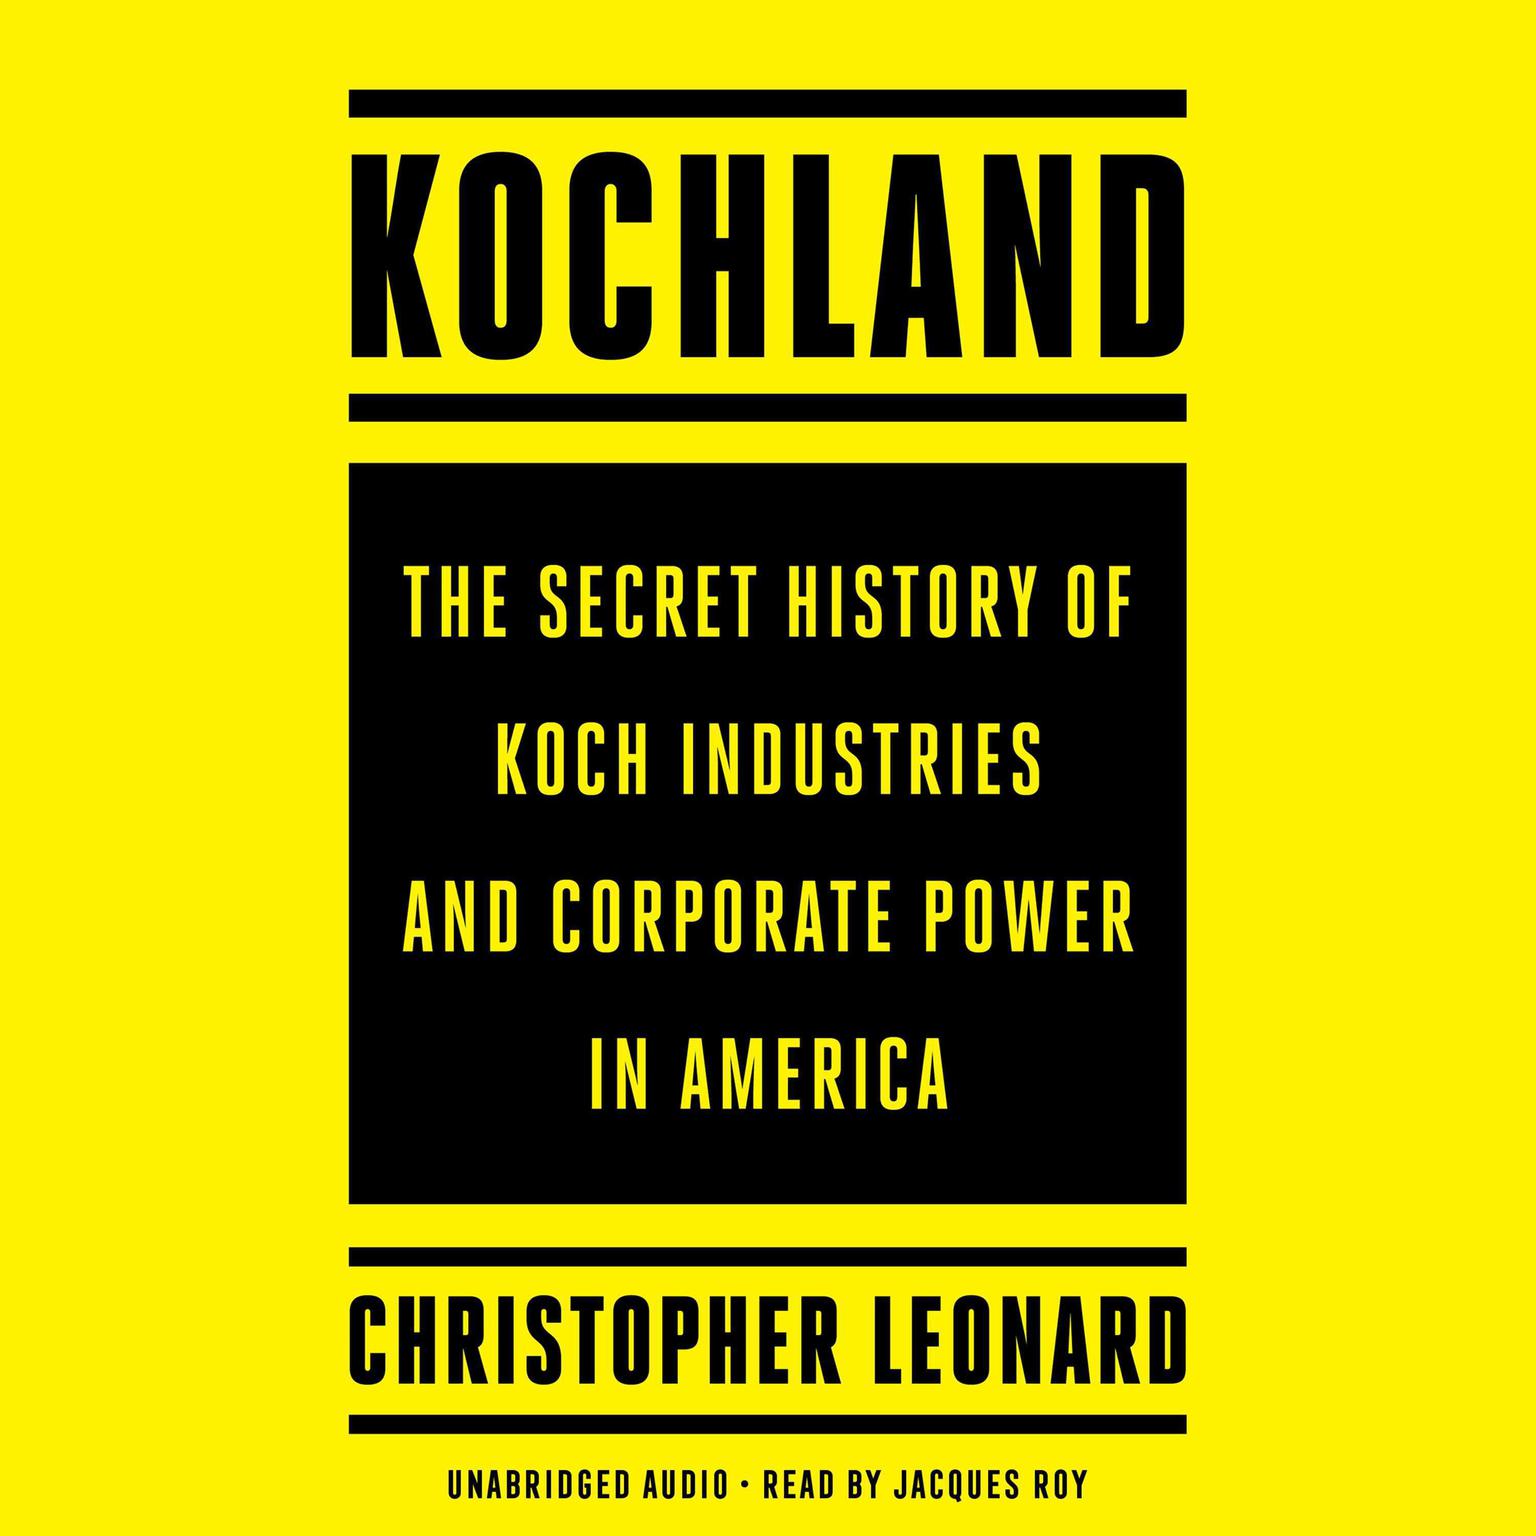 Kochland: The Secret History of Koch Industries and Corporate Power in America Audiobook, by Christopher Leonard